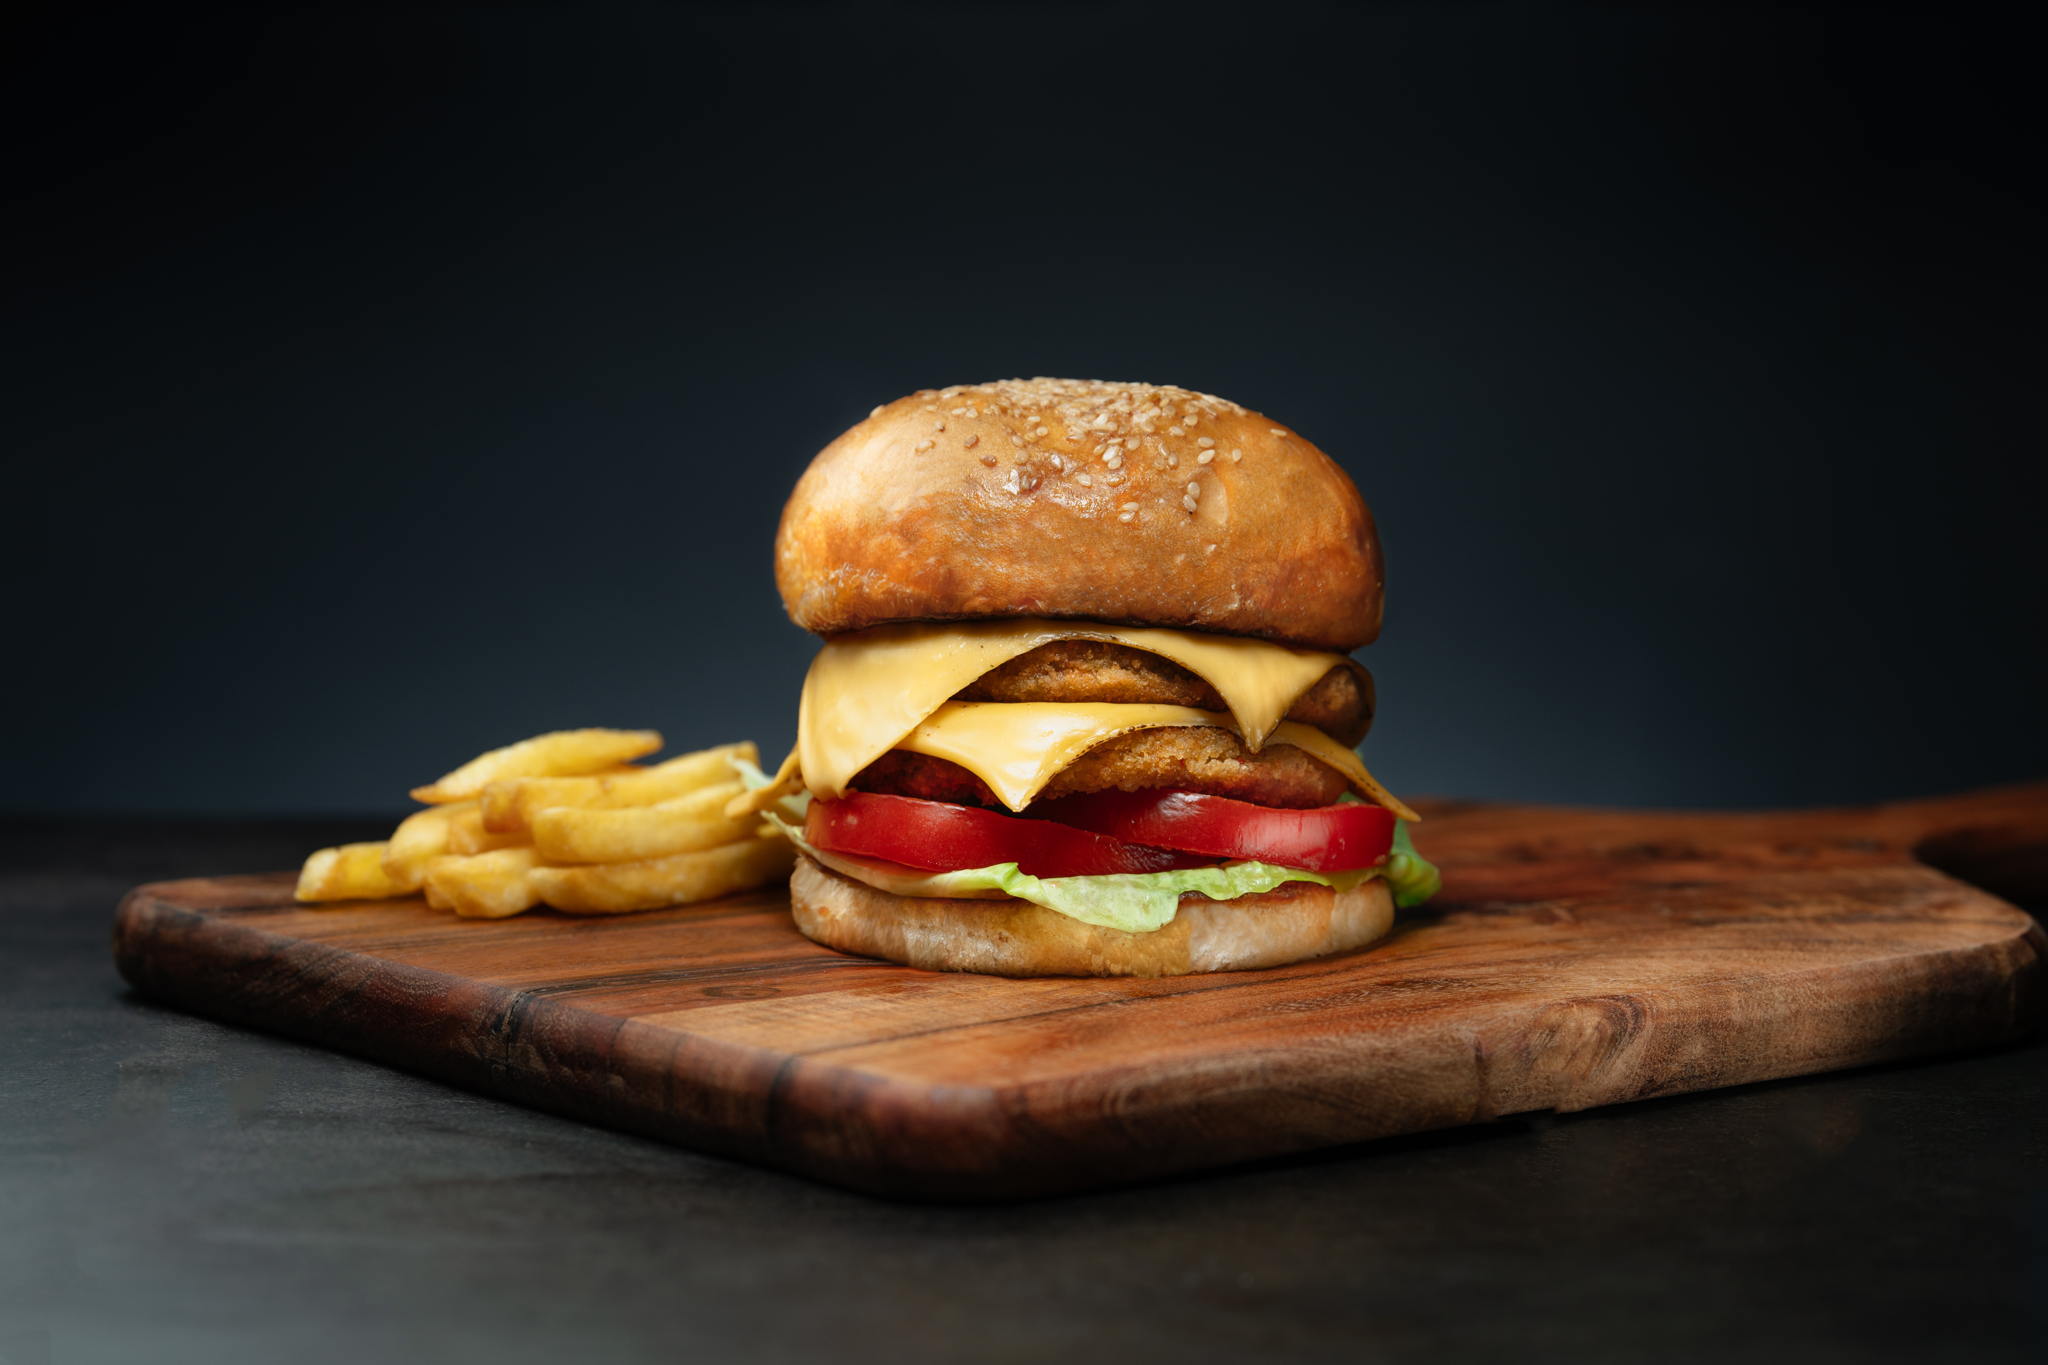 A juicy cheeseburger on a wooden cutting board, served with a side of golden french fries